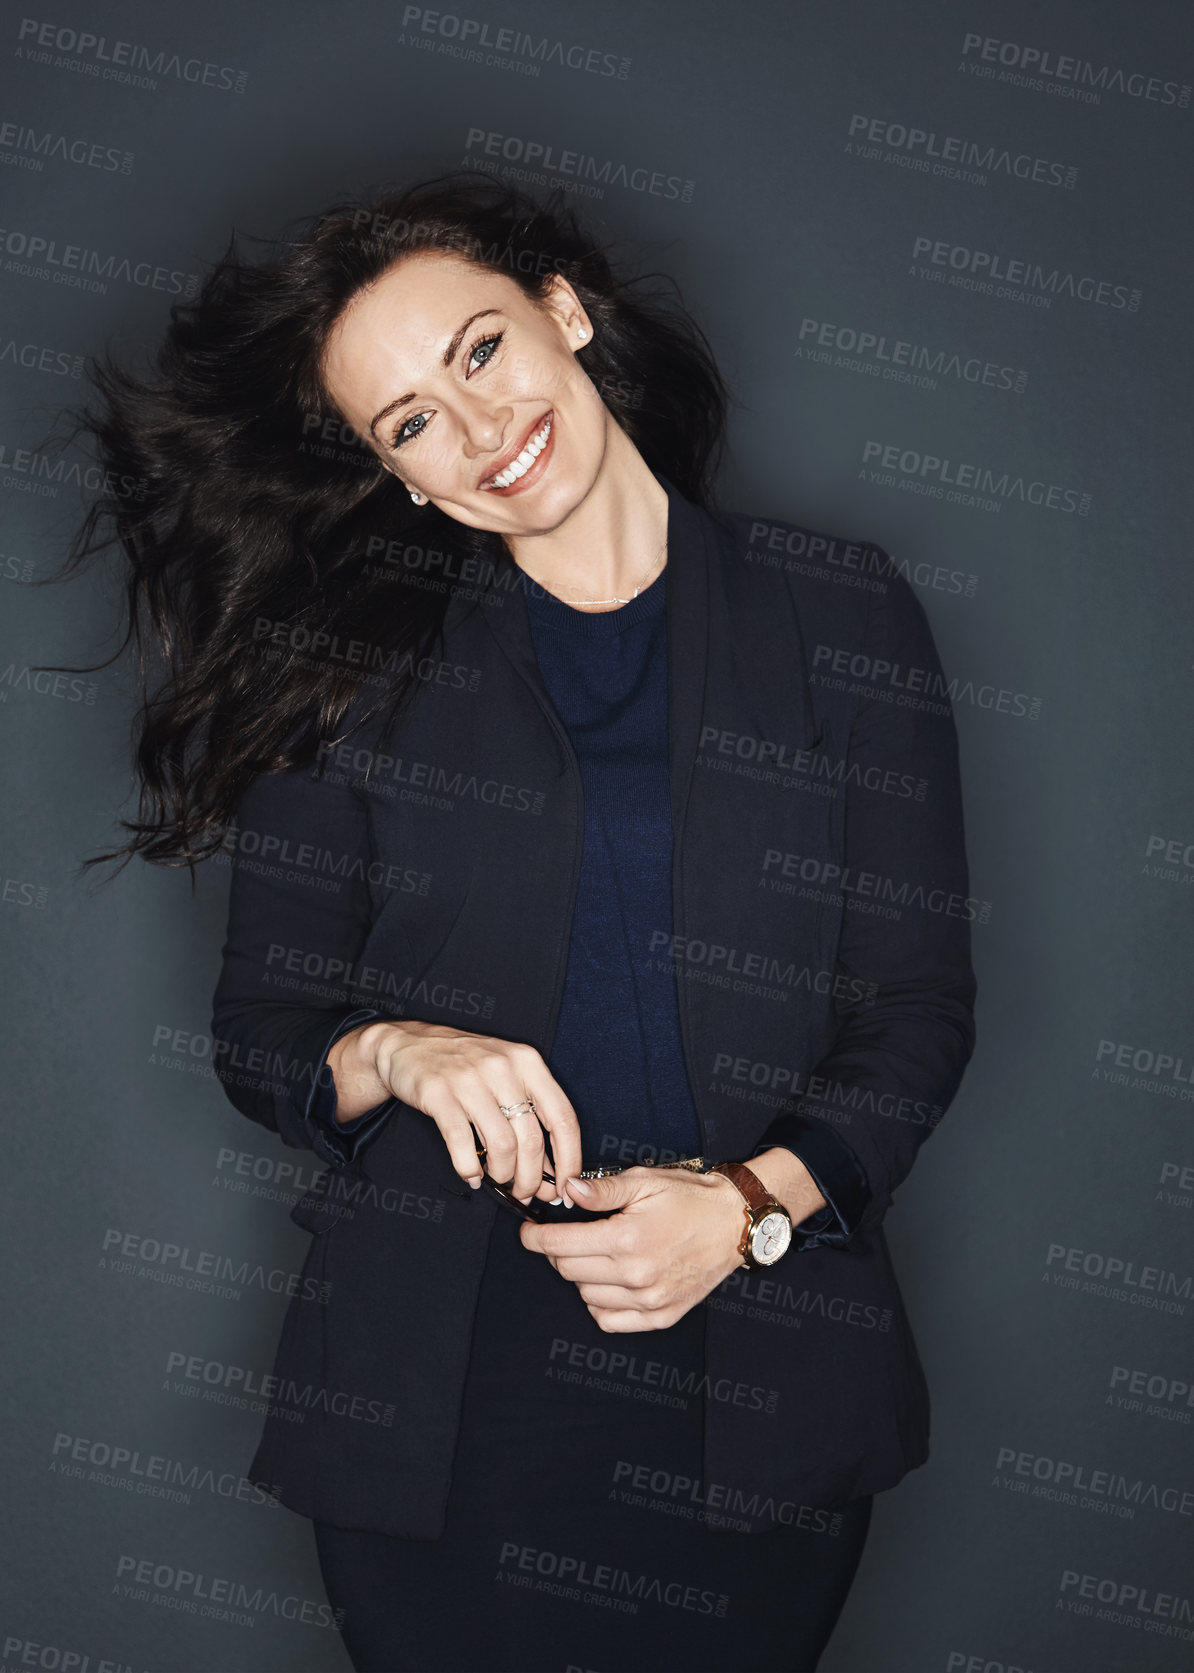 Buy stock photo Studio shot of a young attractive corporate businesswoman posing against a grey background